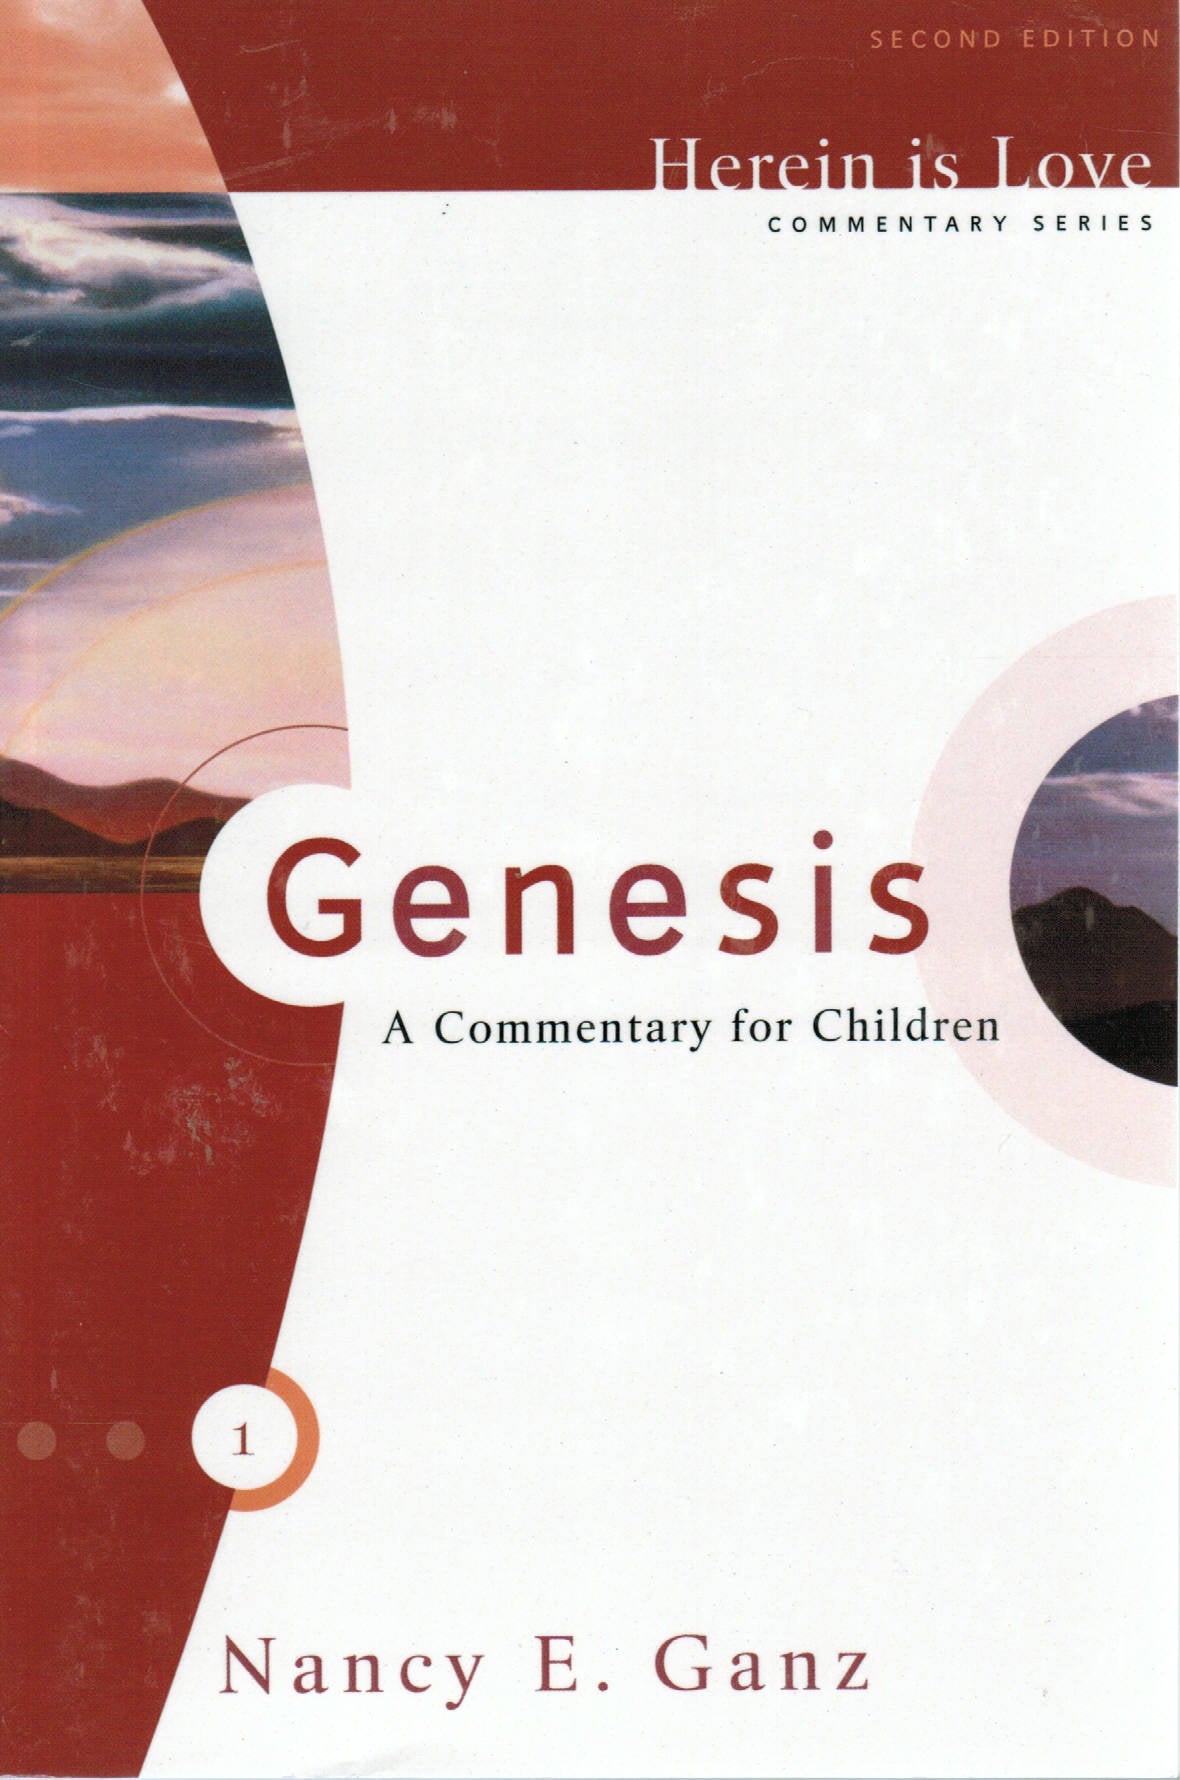 Herein is Love - Genesis: A Commentary for Children